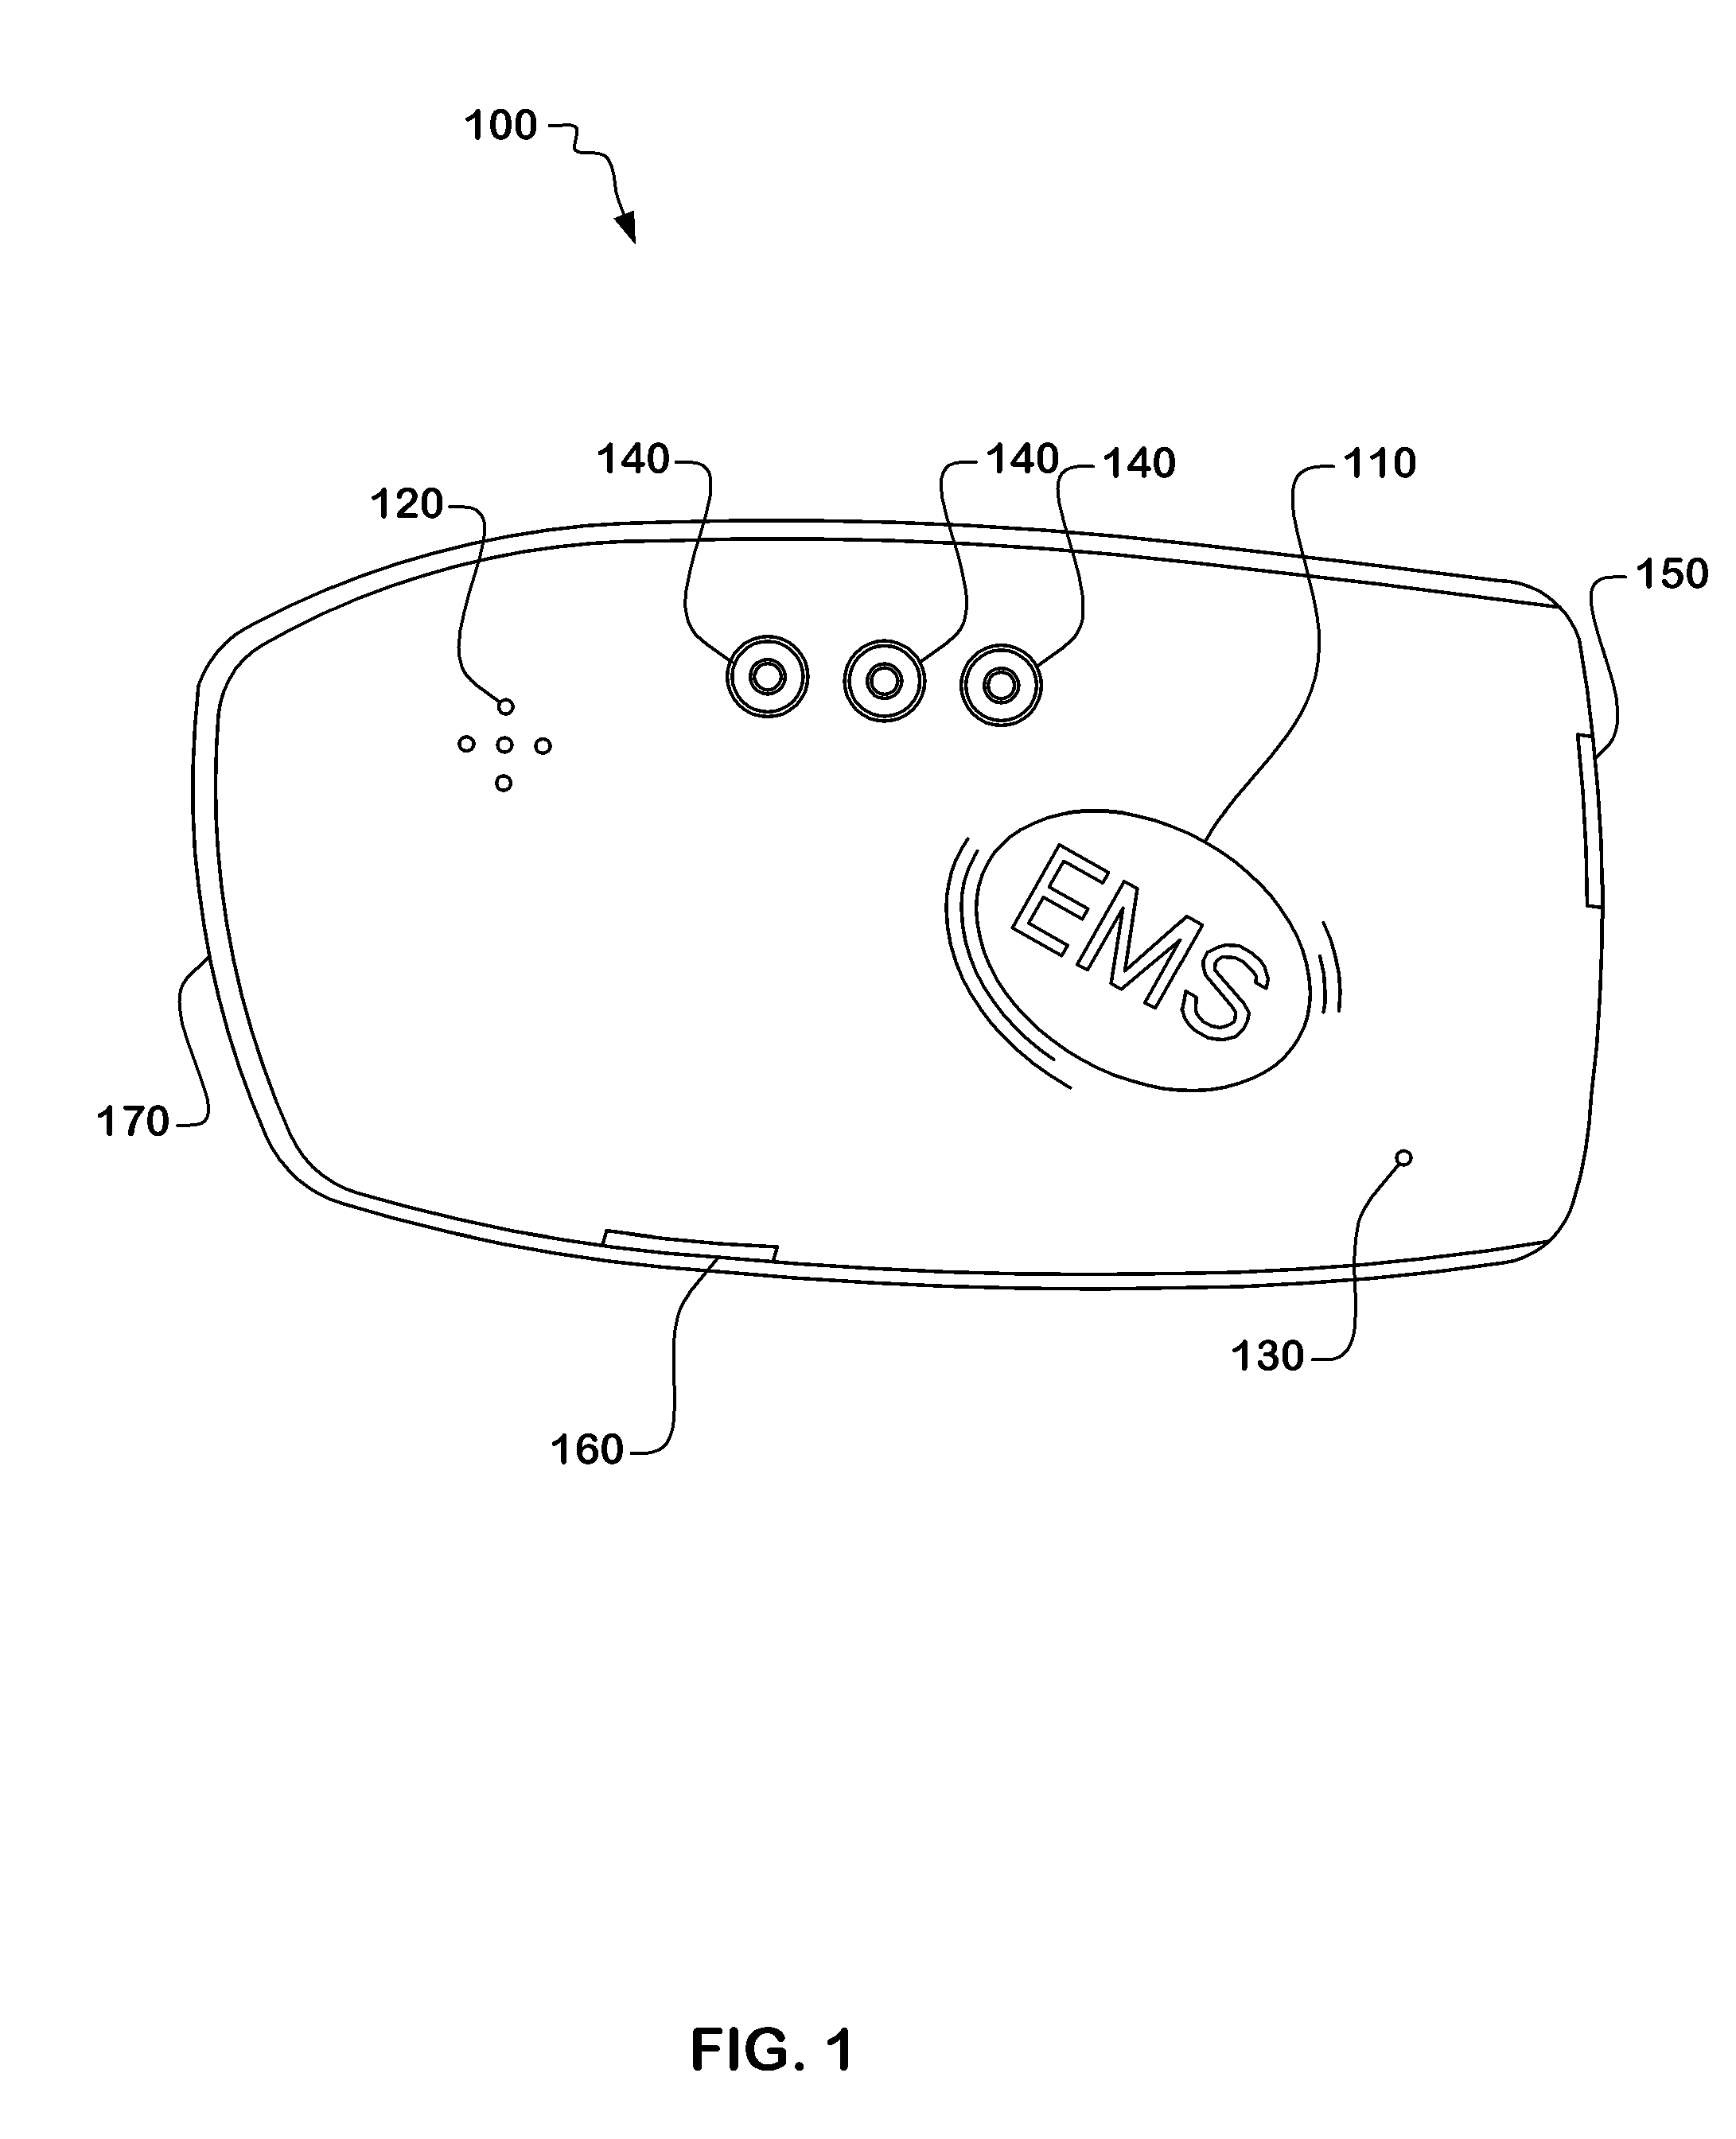 Portable Wireless Automobile and Personal Emergency Responder and Messenger System and Method